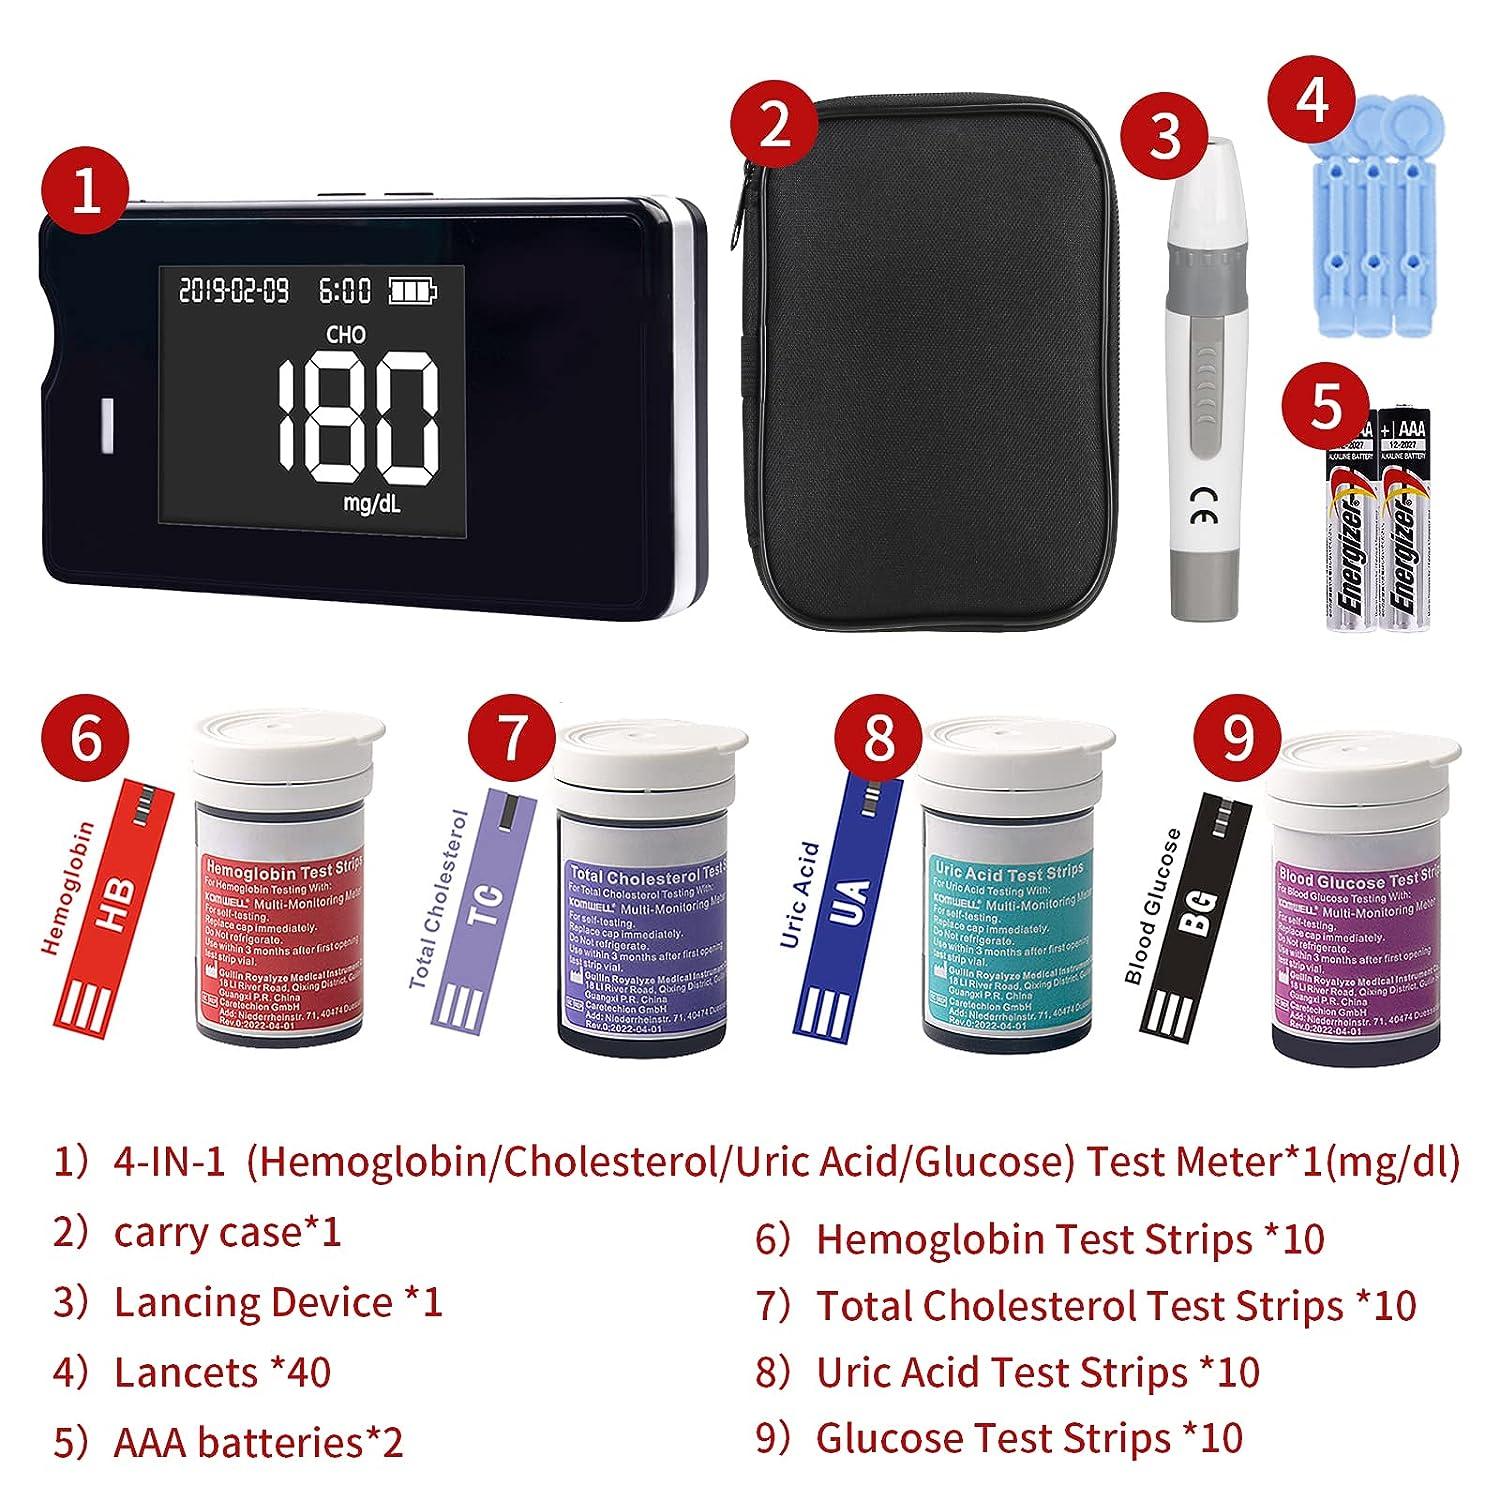 Accu-Answer 4 in 1 Hemoglobin Test Meter Kit Hemoglobin Tester Cholesterol Test  Kit Uric Acid Test Kit 40 Test Strips Total Included. No Code Need Accurate  and Fast